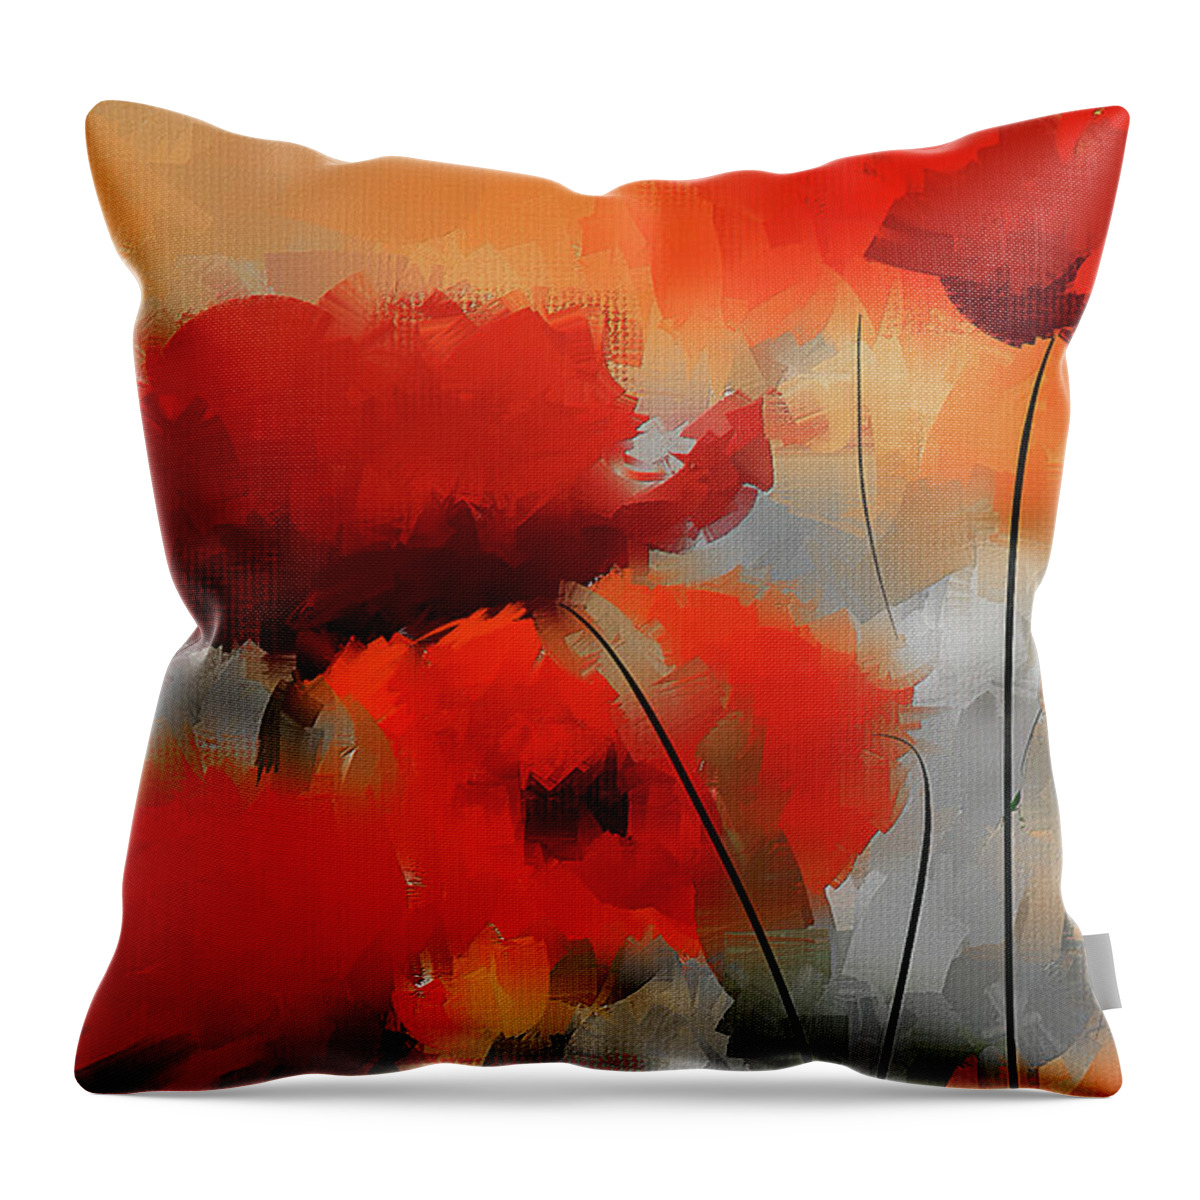 Poppies Throw Pillow featuring the painting Dream Of Poppies II by Lourry Legarde